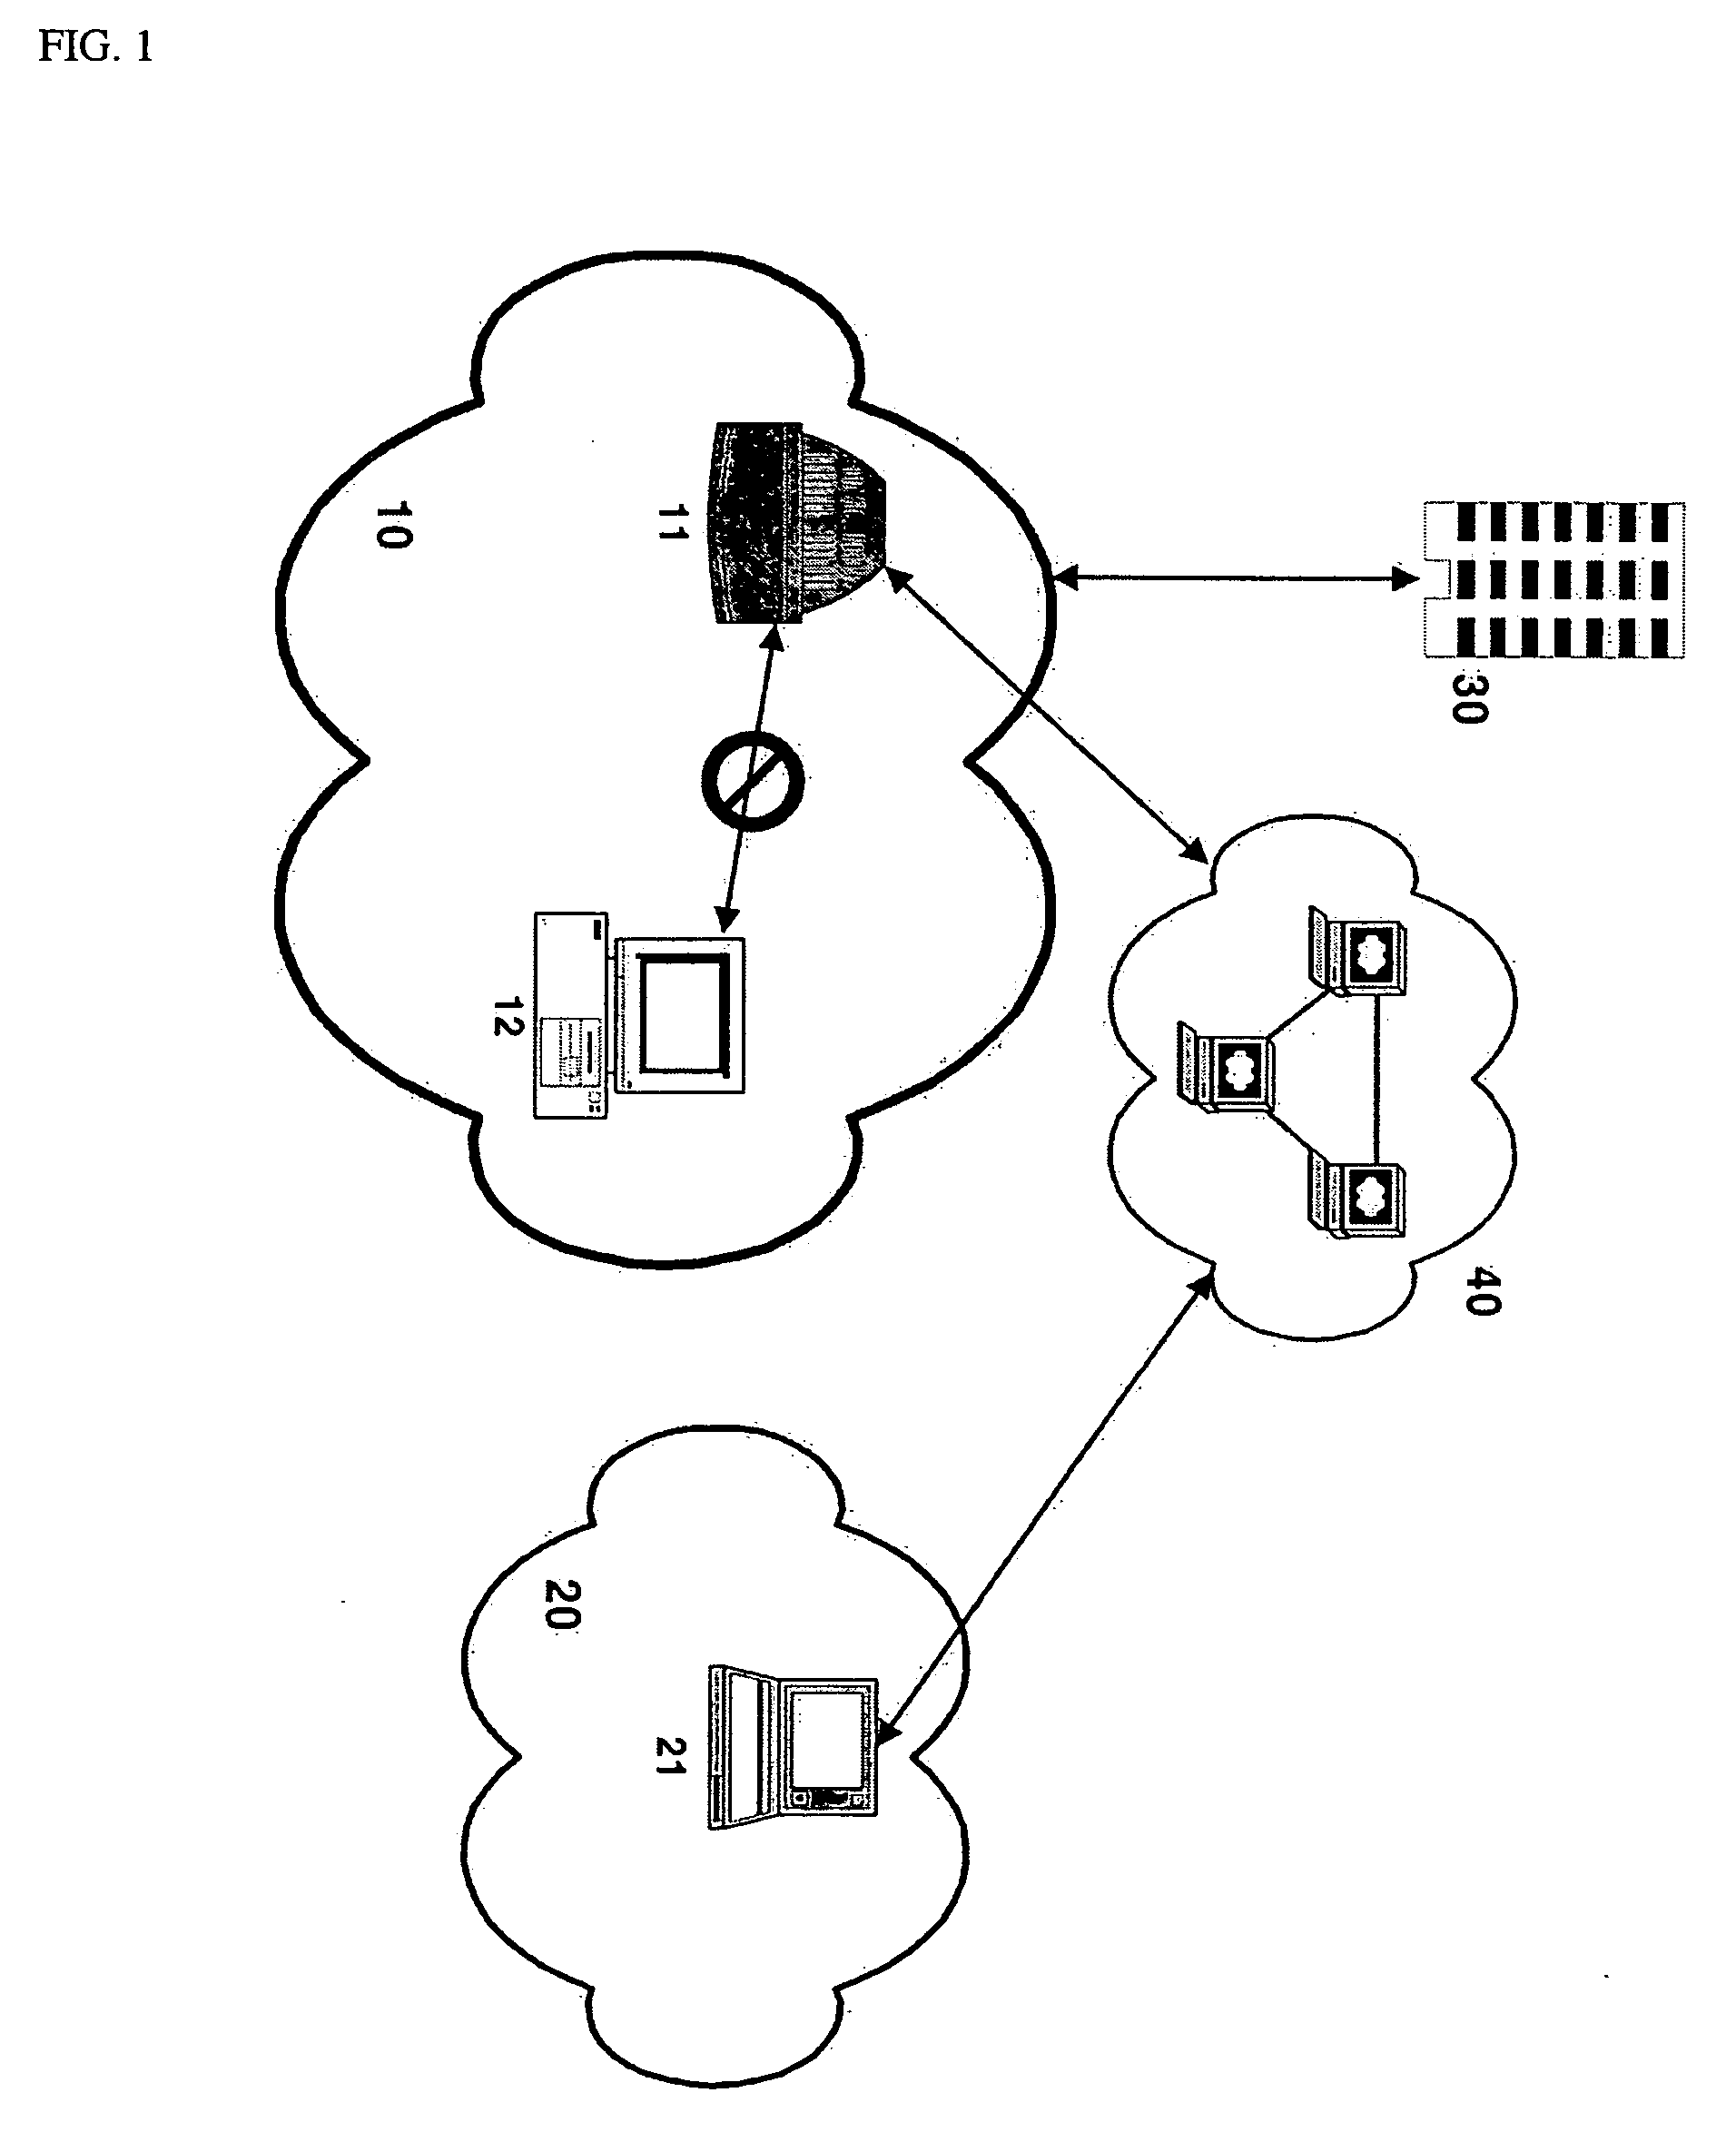 Network device and method for providing content compatibility between network devices having different respective digital rights management methods